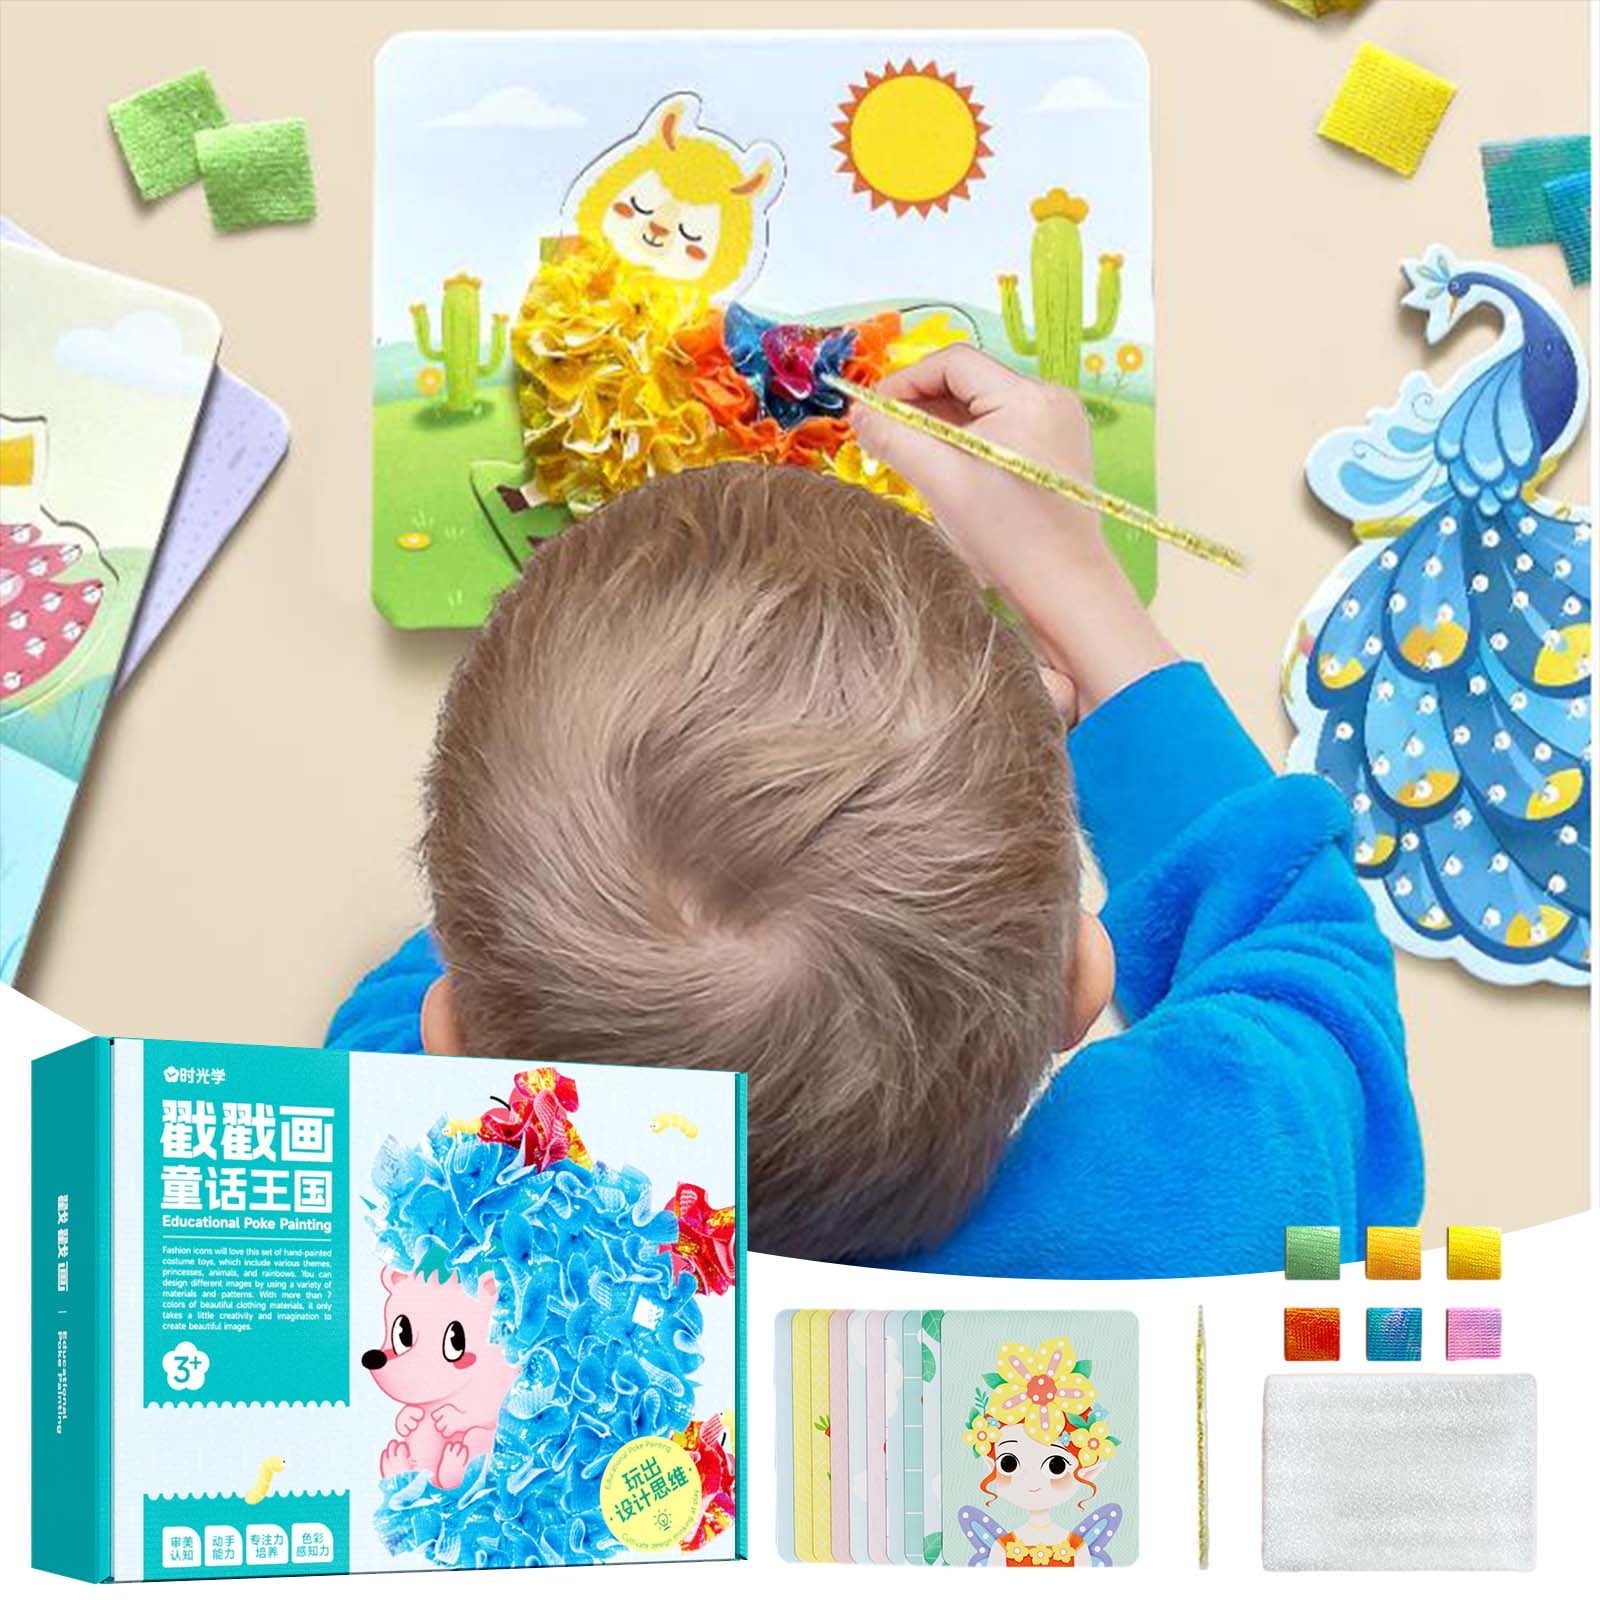 PaperMarket, DIY Craft Kits & DIY Kits For All Ages